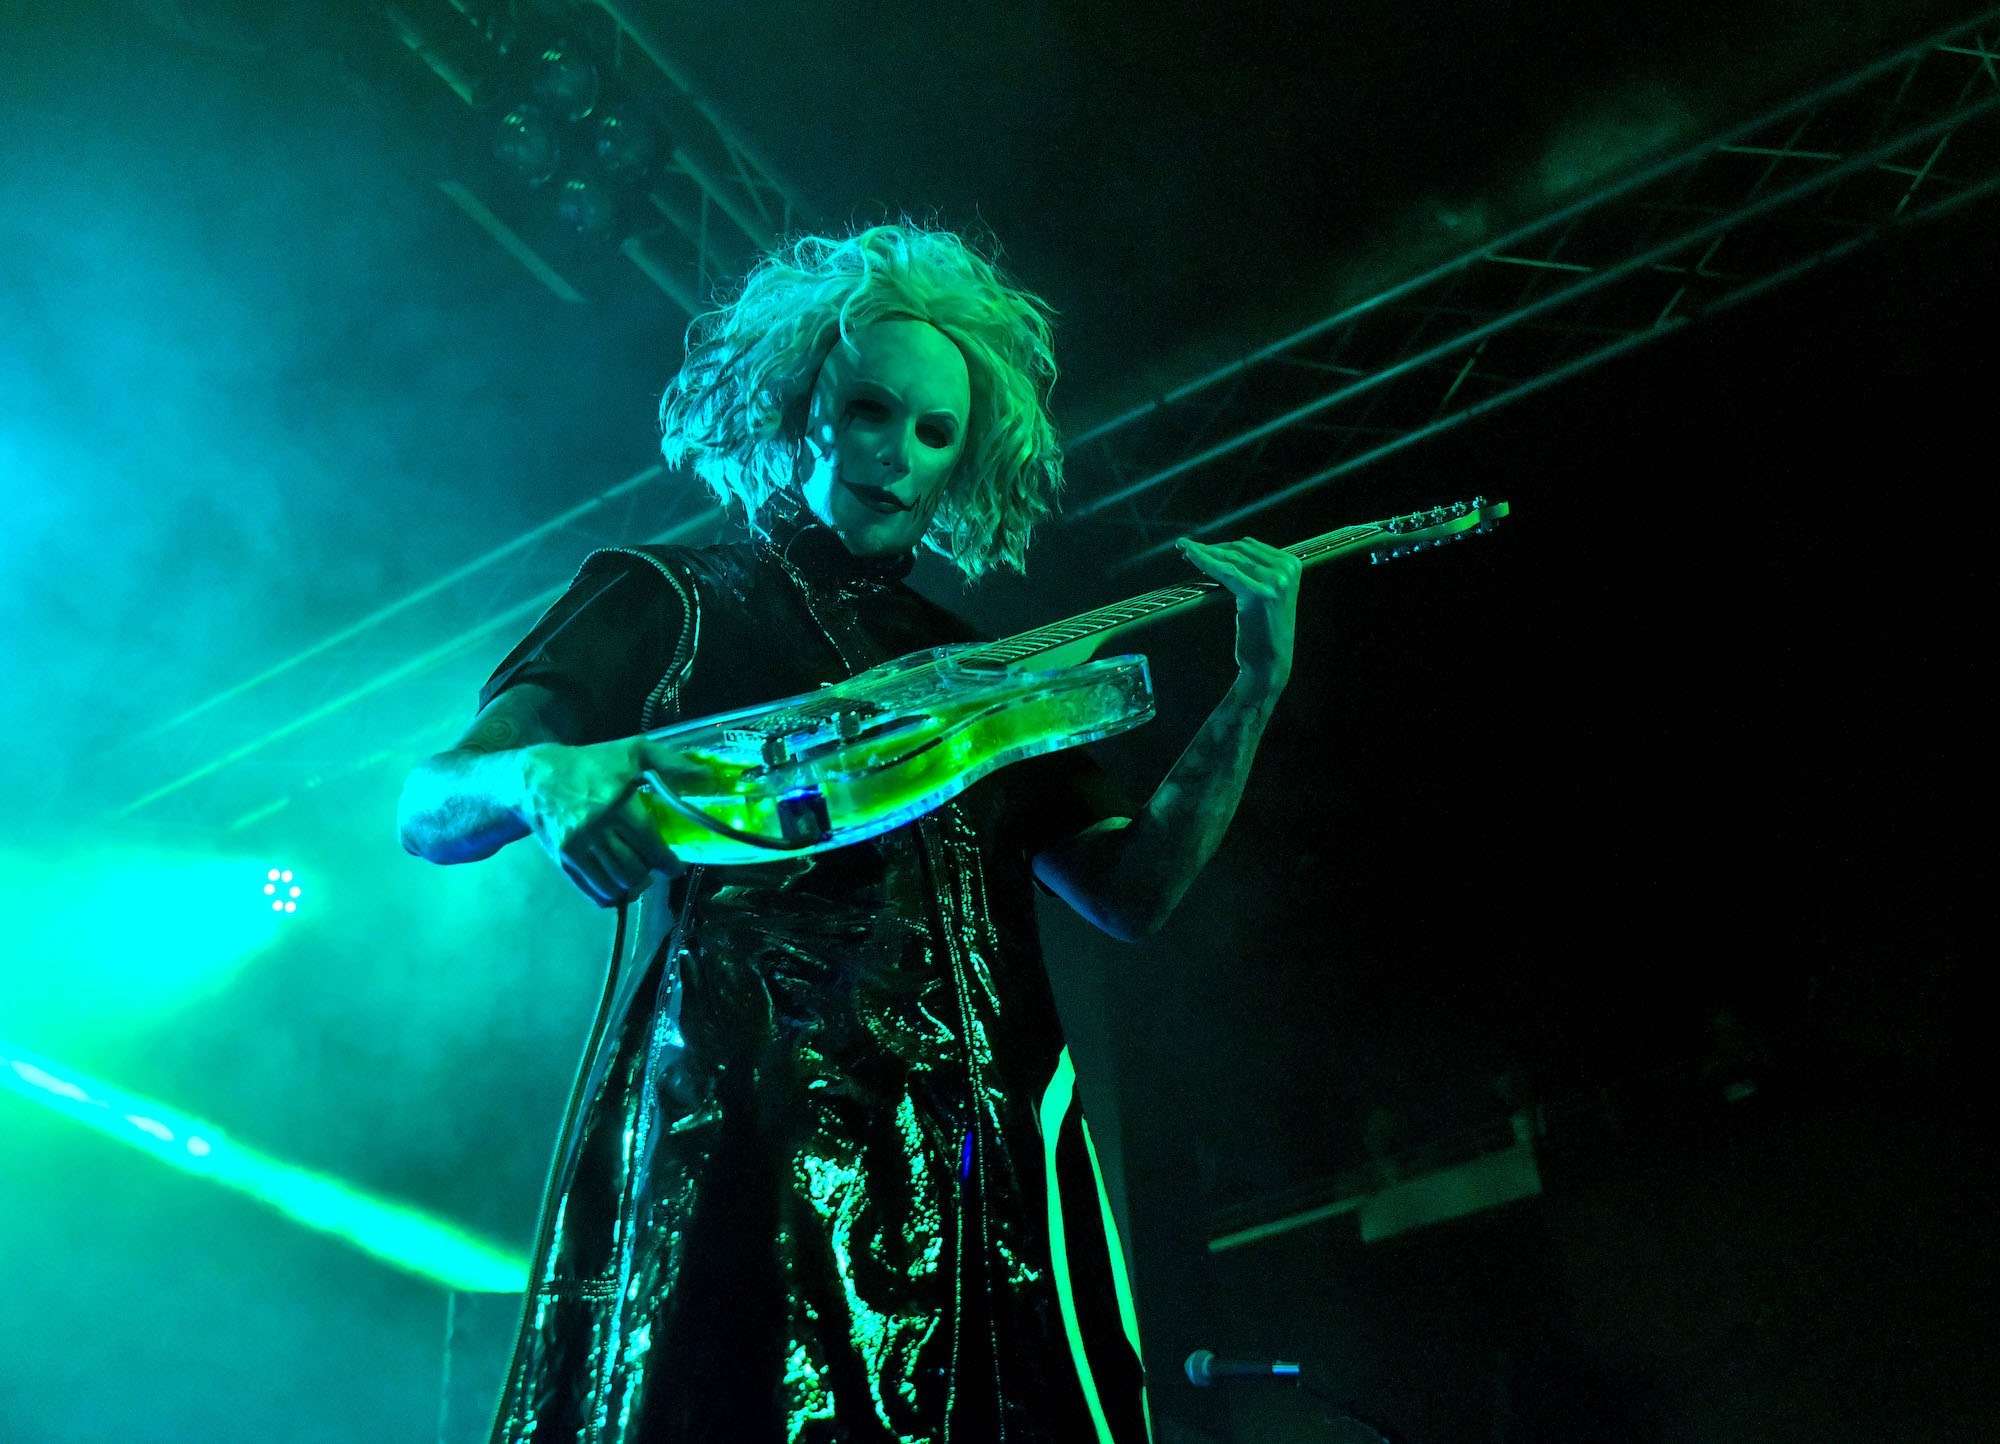 John 5 Live at The Forge [GALLERY] 6